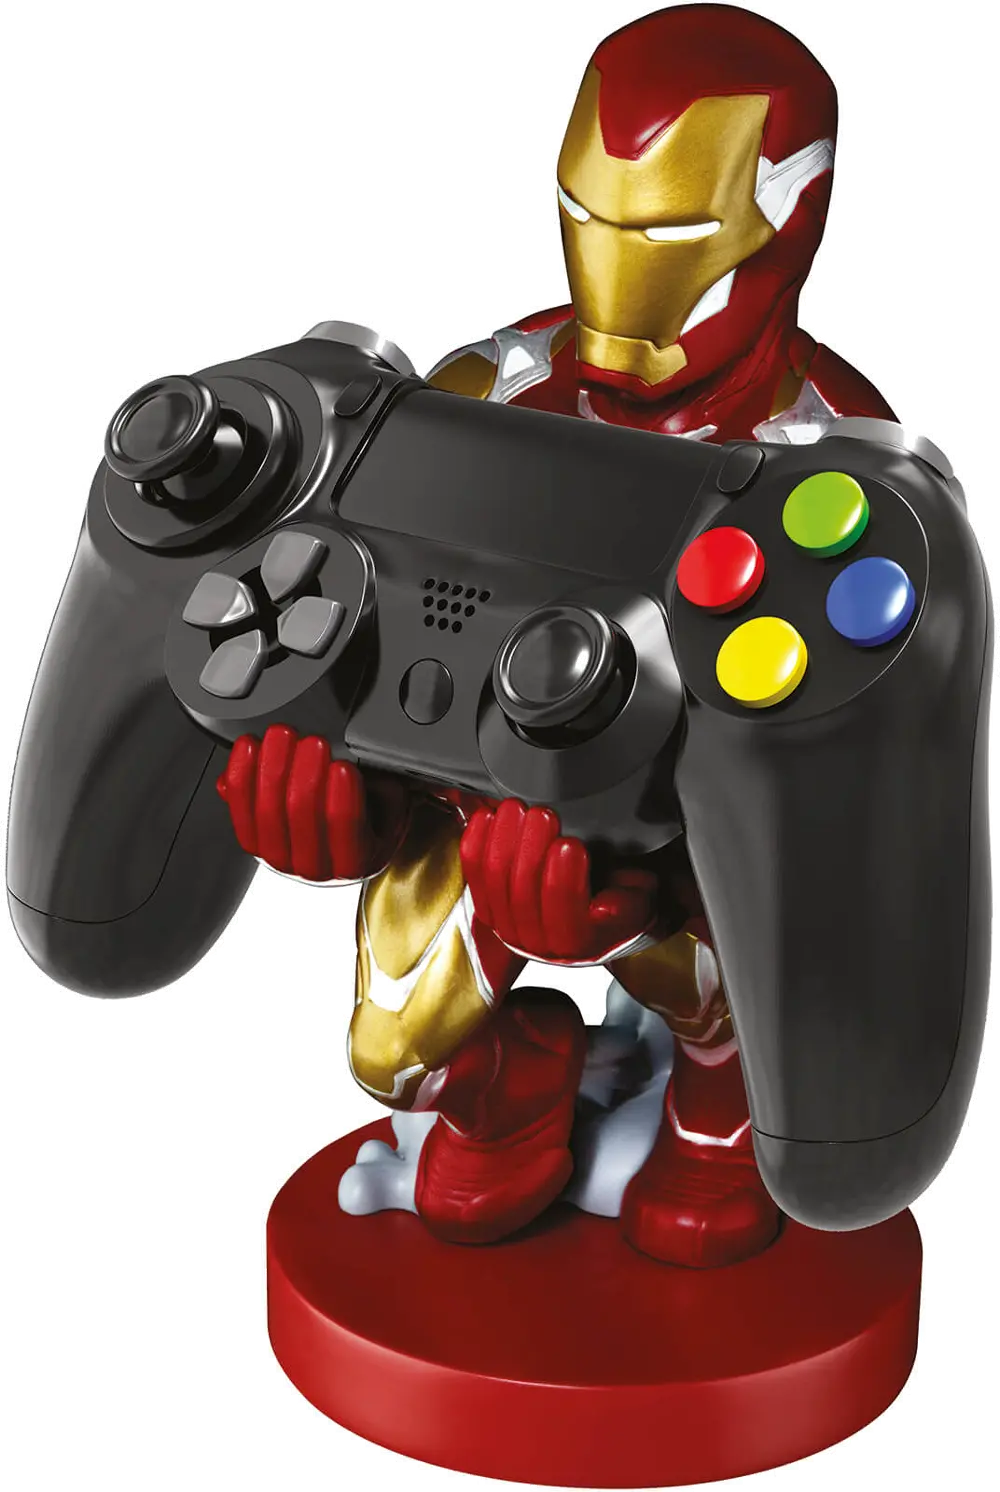 Iron Man Cable Guy - Controller and Device Holder-1